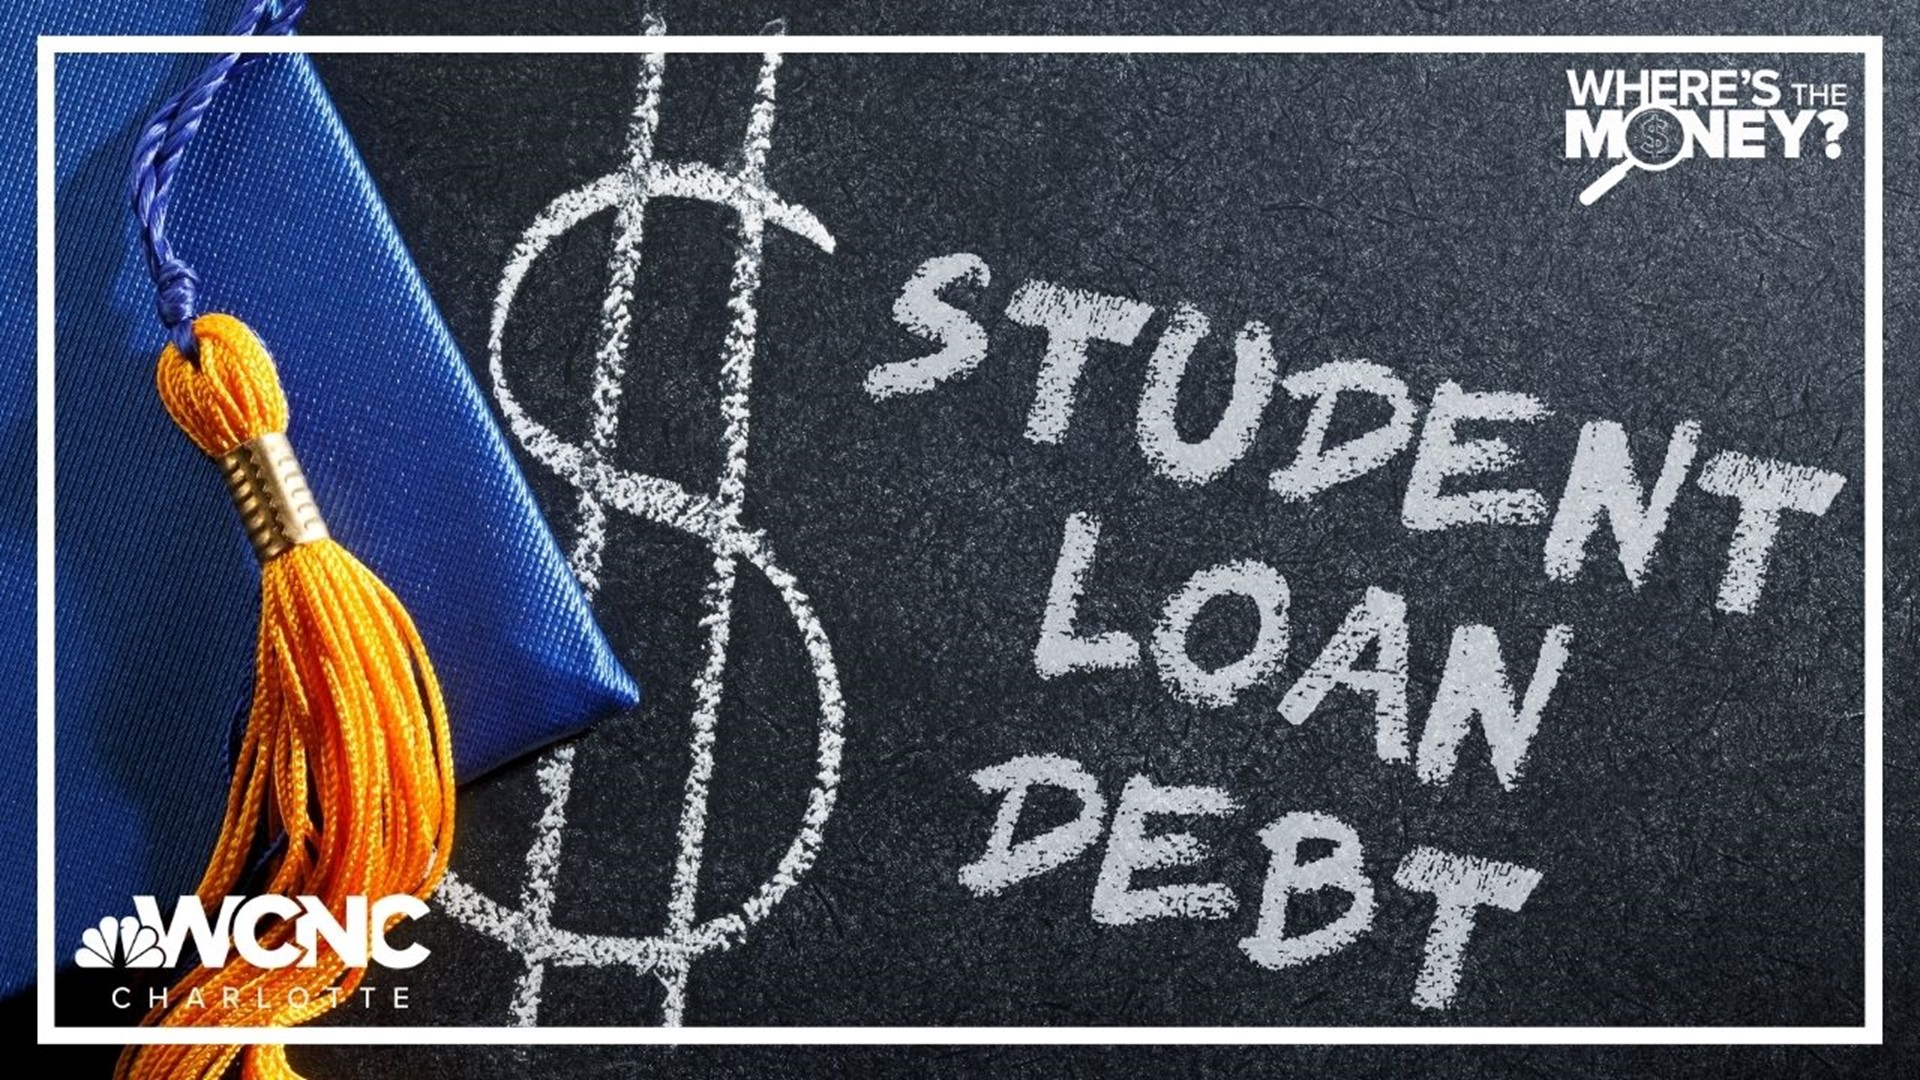 A recent study found that more than half of student loan borrowers admitted to choosing between paying their loans or paying rent.